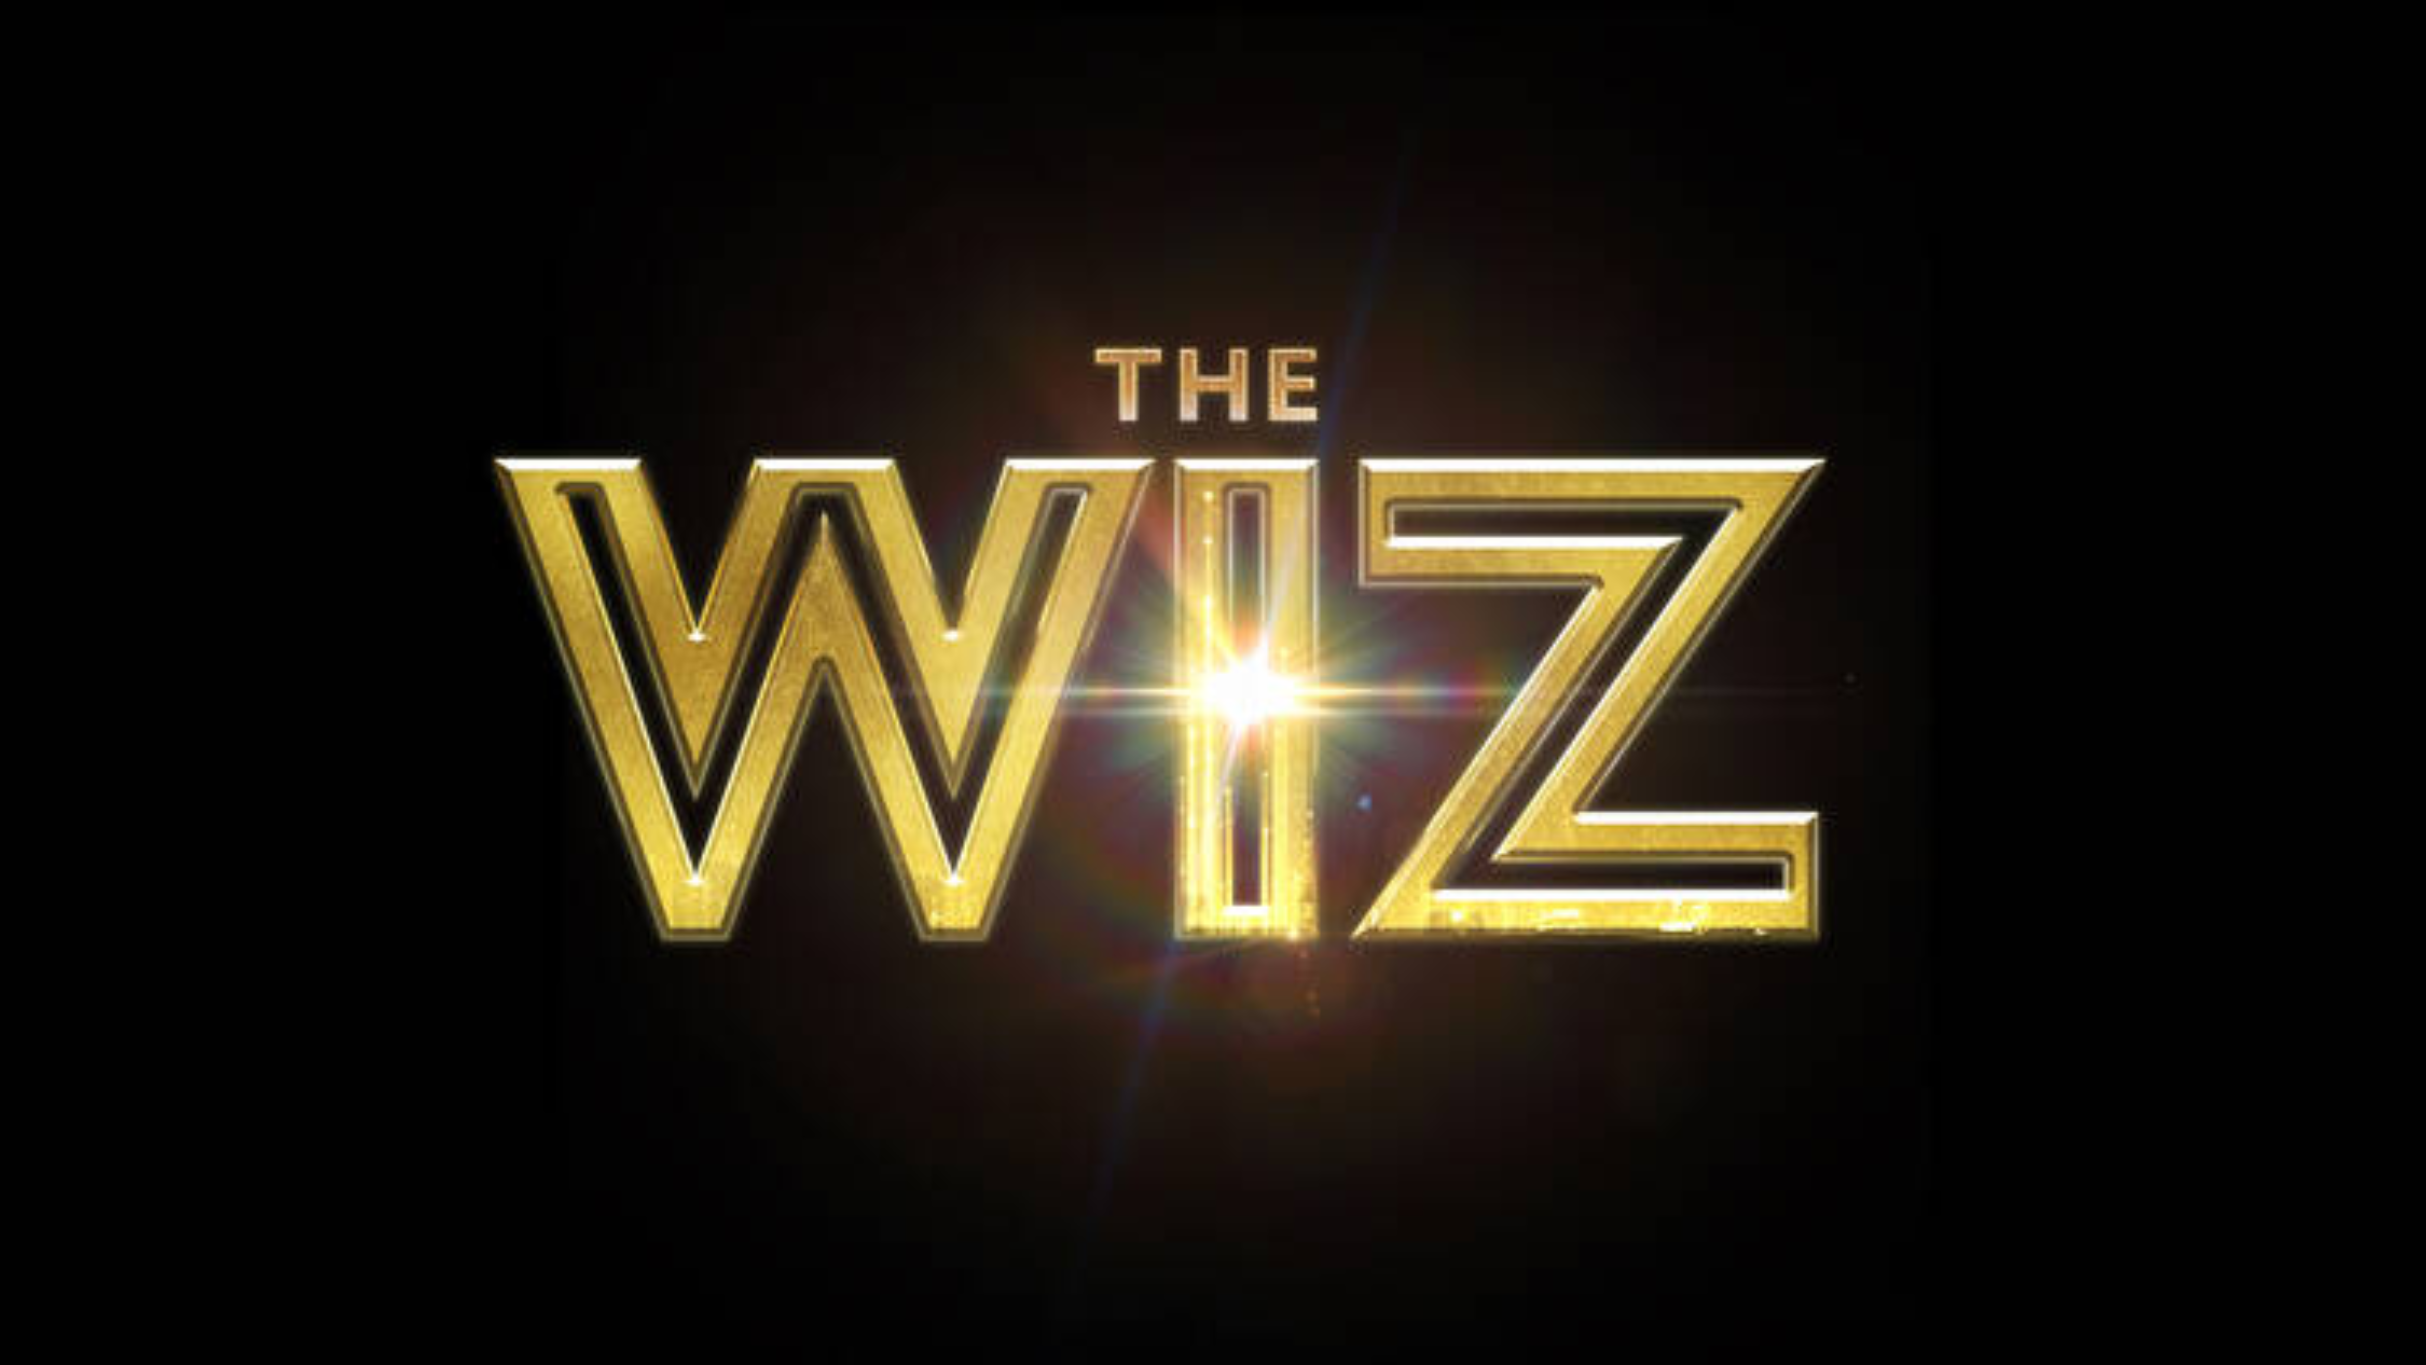 The Wiz (Chicago) in Chicago promo photo for BIC Summer Concert presale offer code